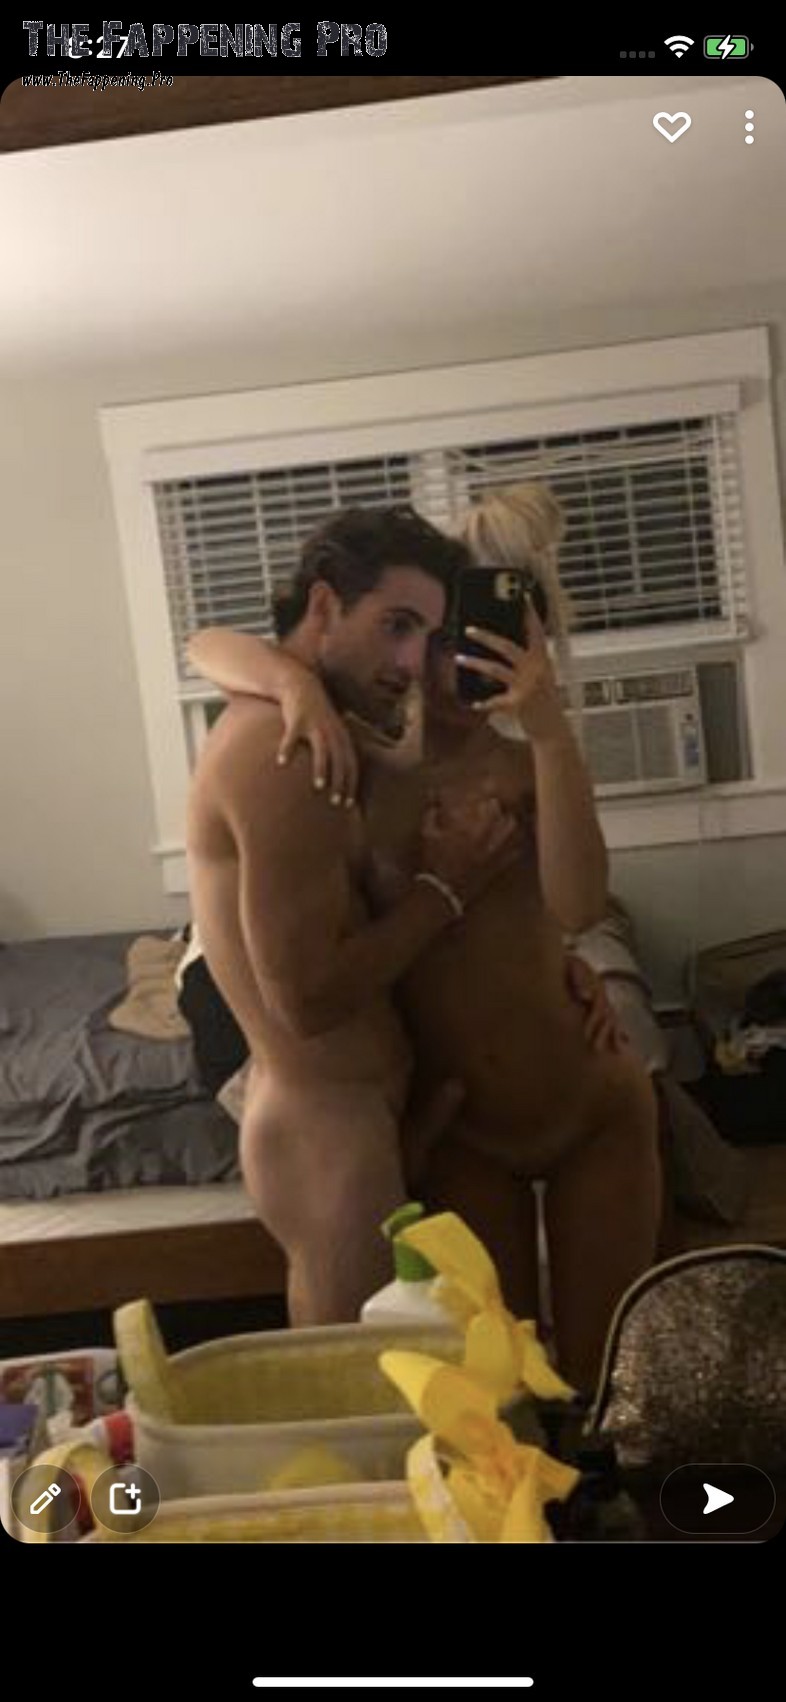 Overtime Megan Nude Leaked TheFappening.Pro 151 - Megan Eugenio aka Overtime Megan Nude TikTok Star From Massachusetts (Over 100 Leaked Photos)